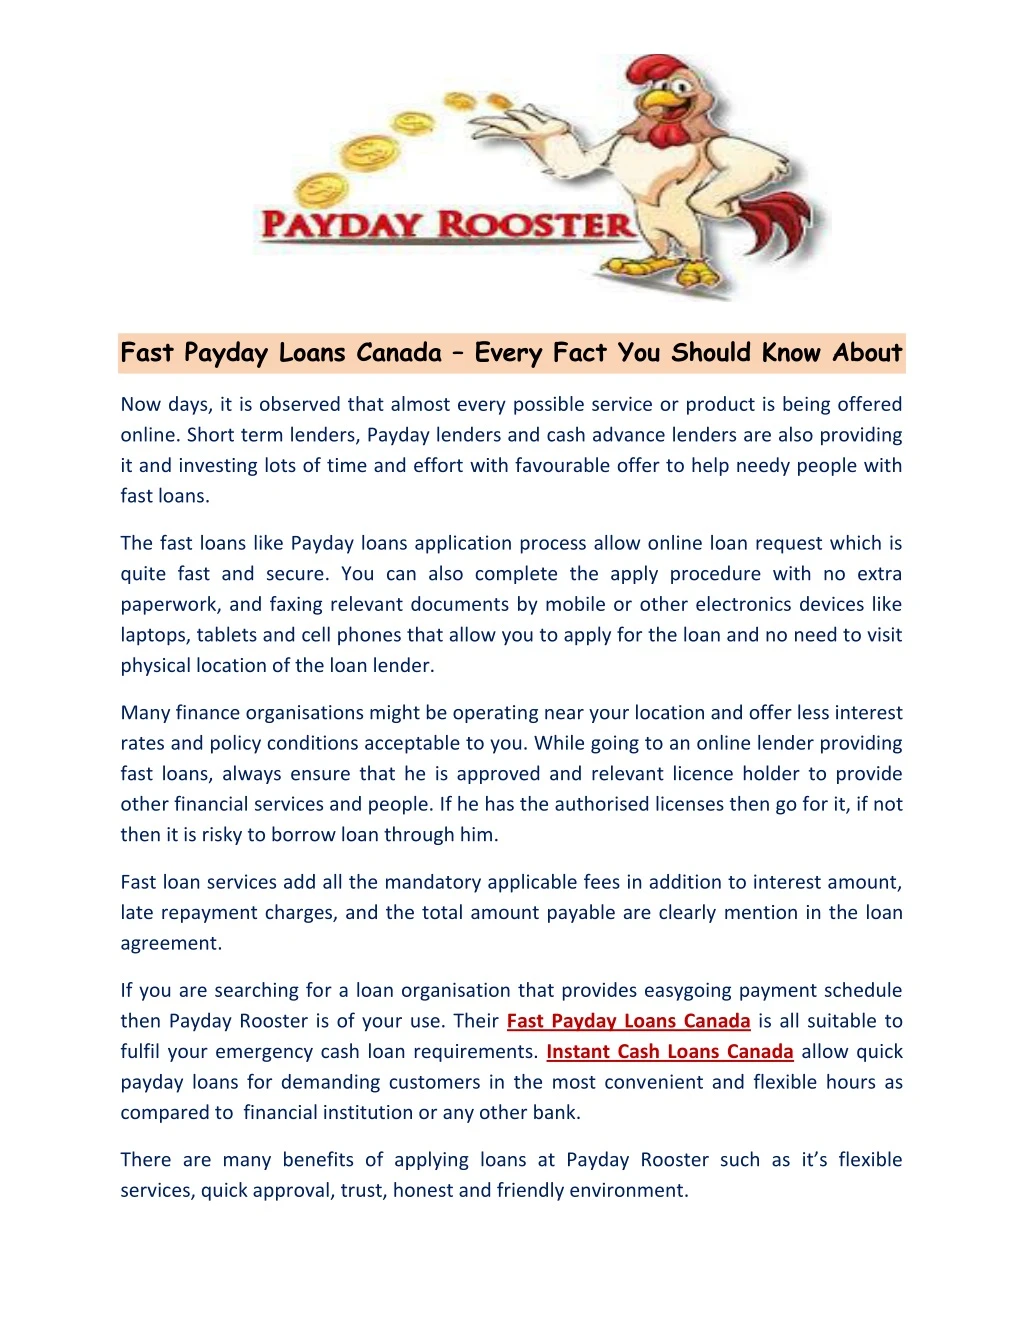 fast payday loans canada every fact you should